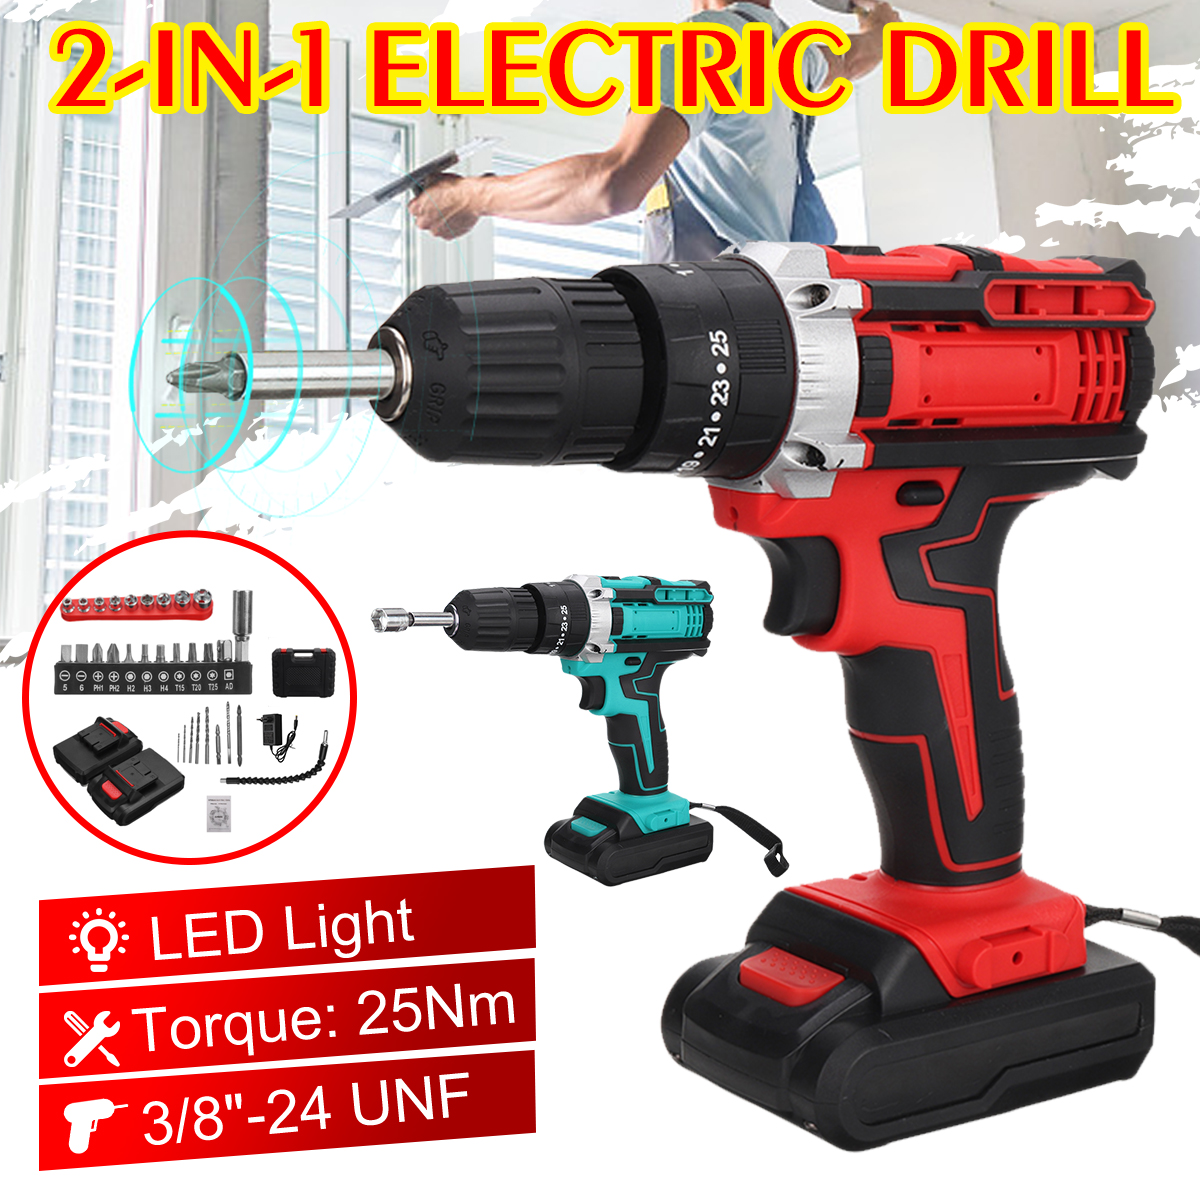 Cordless-Rechargeable-Electric-Drill-Screwdriver-LED-Portable-Metal-Wood-Drilling-Tool-W-12pcs-Batte-1848724-2